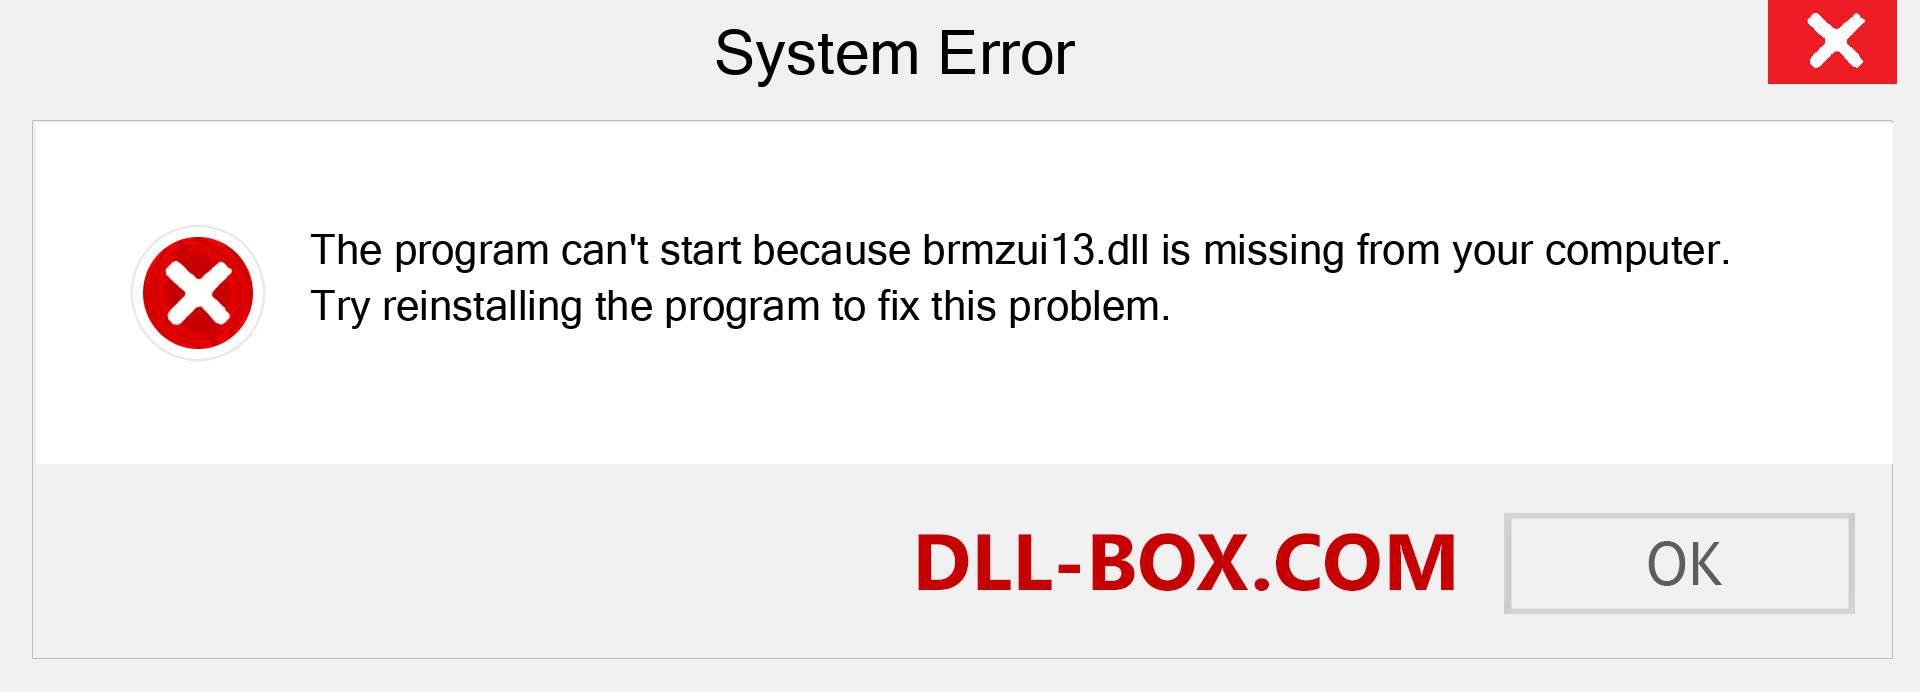  brmzui13.dll file is missing?. Download for Windows 7, 8, 10 - Fix  brmzui13 dll Missing Error on Windows, photos, images